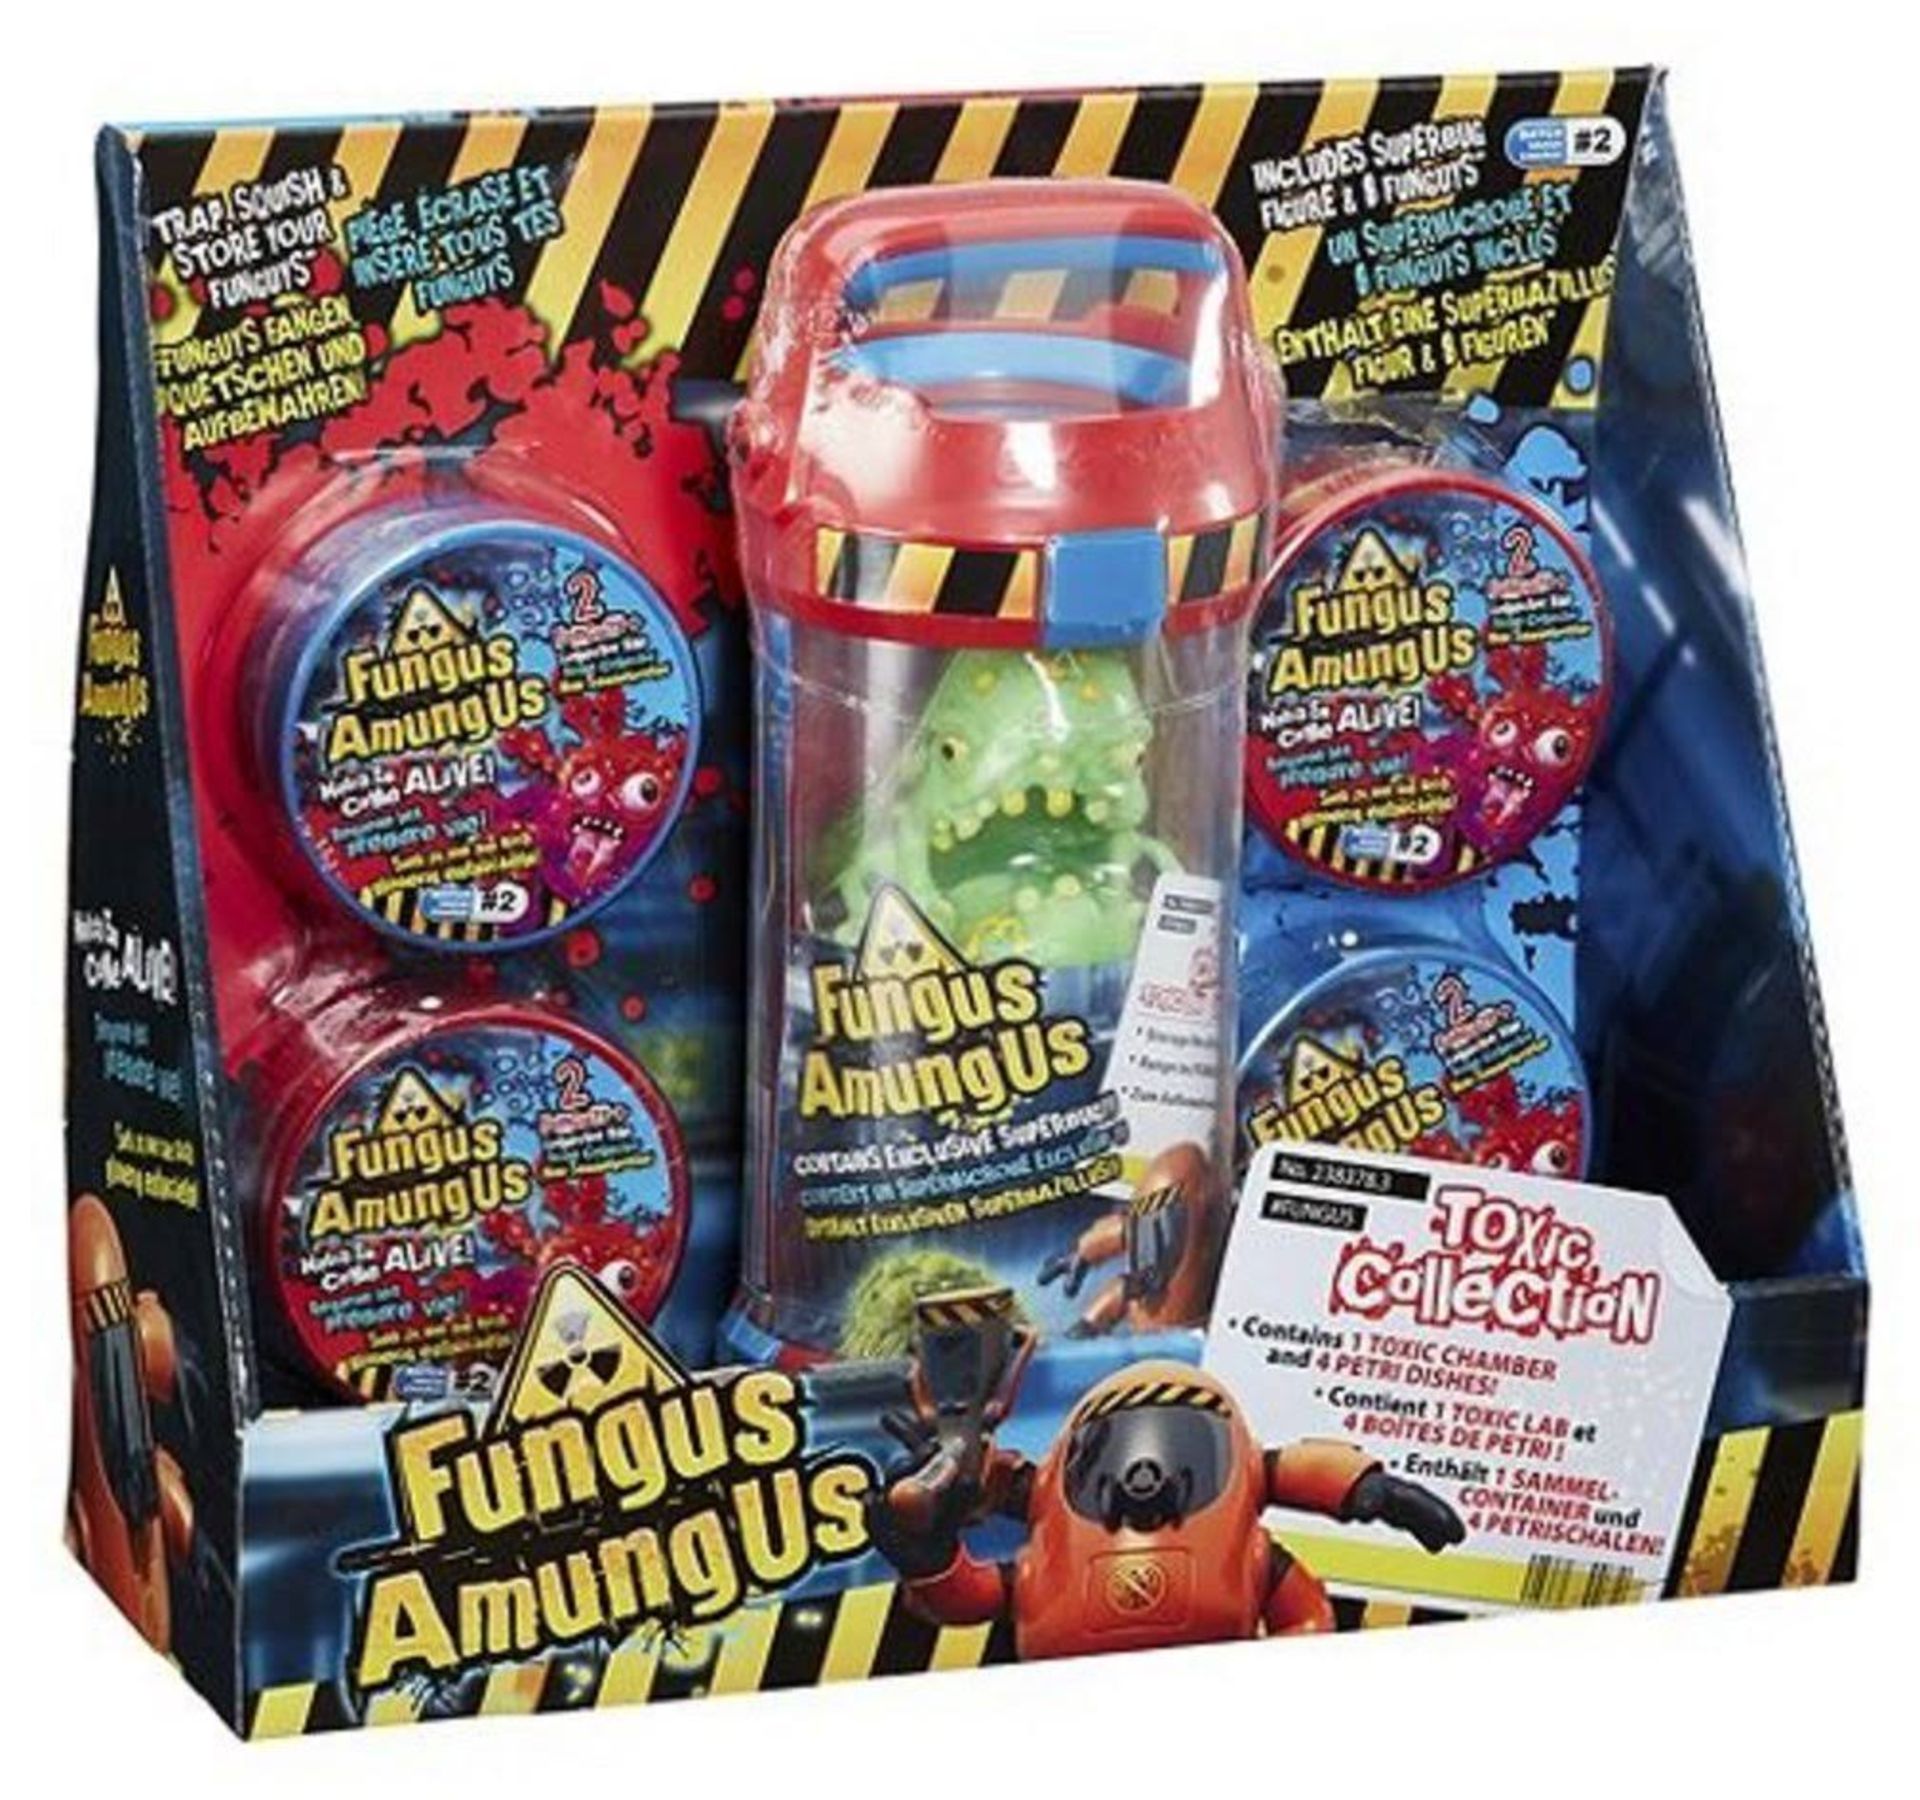 V *TRADE QTY* Brand New Fungus Amungus Toxic Collection ISP Up To £24.99 (Ebay) X 8 YOUR BID PRICE